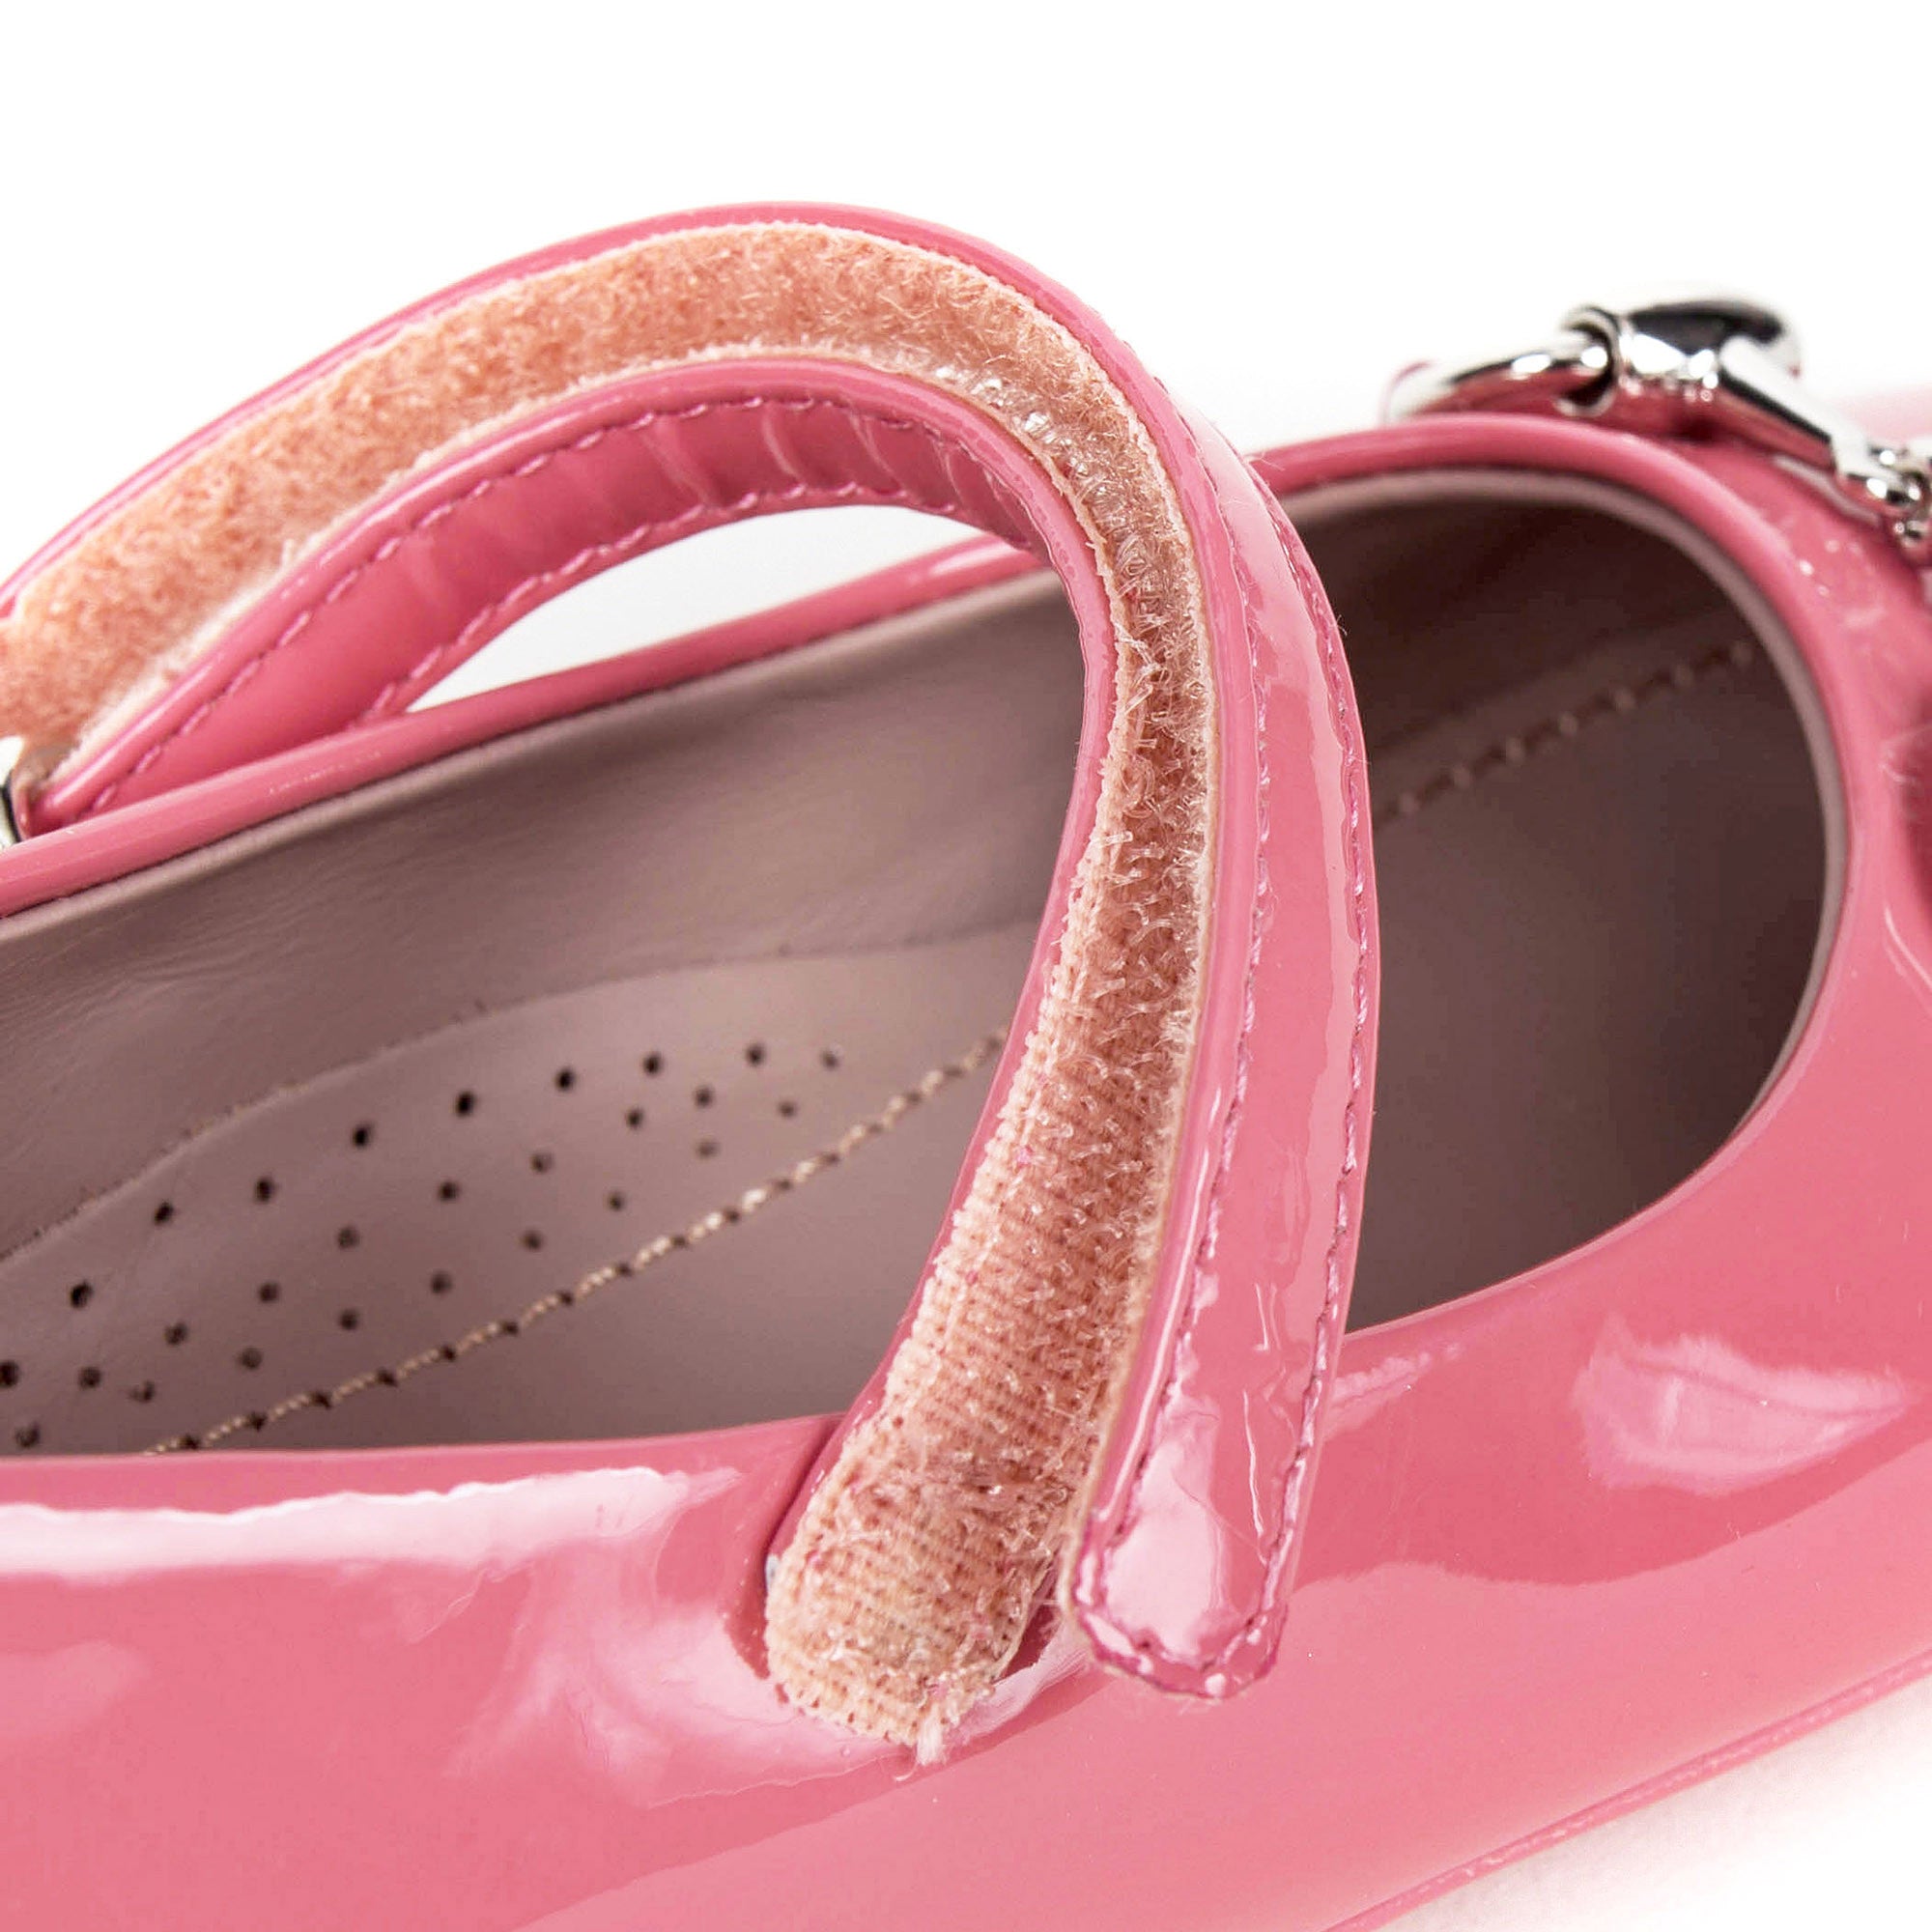 Girls Pink Patent Leather Horsebit Shoes